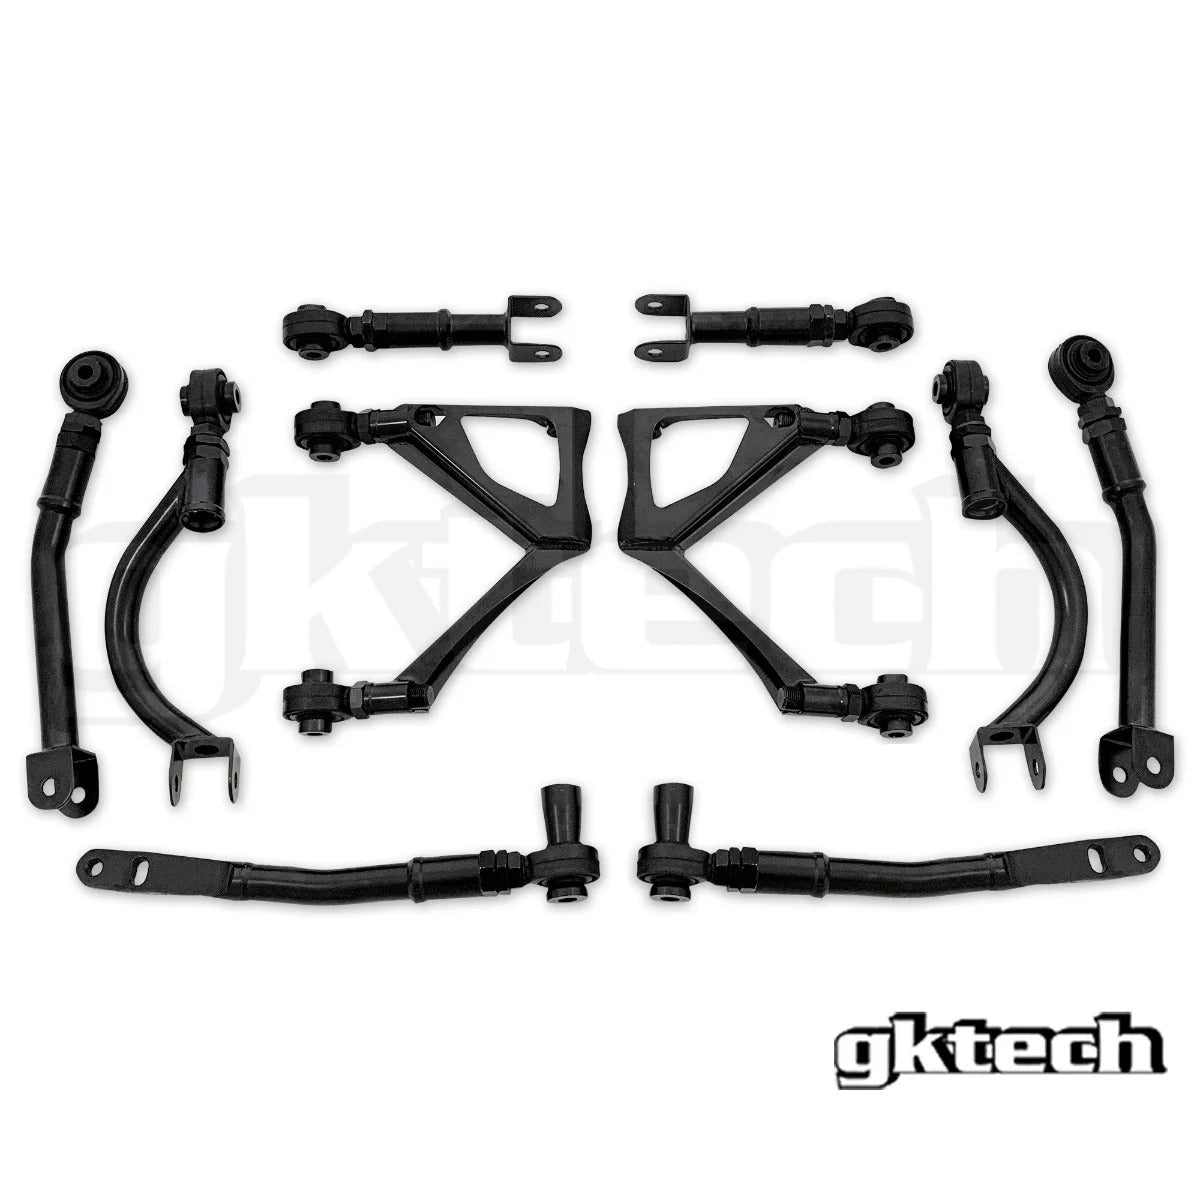 R33/R34 Skyline Suspension arm package (10% combo discount)